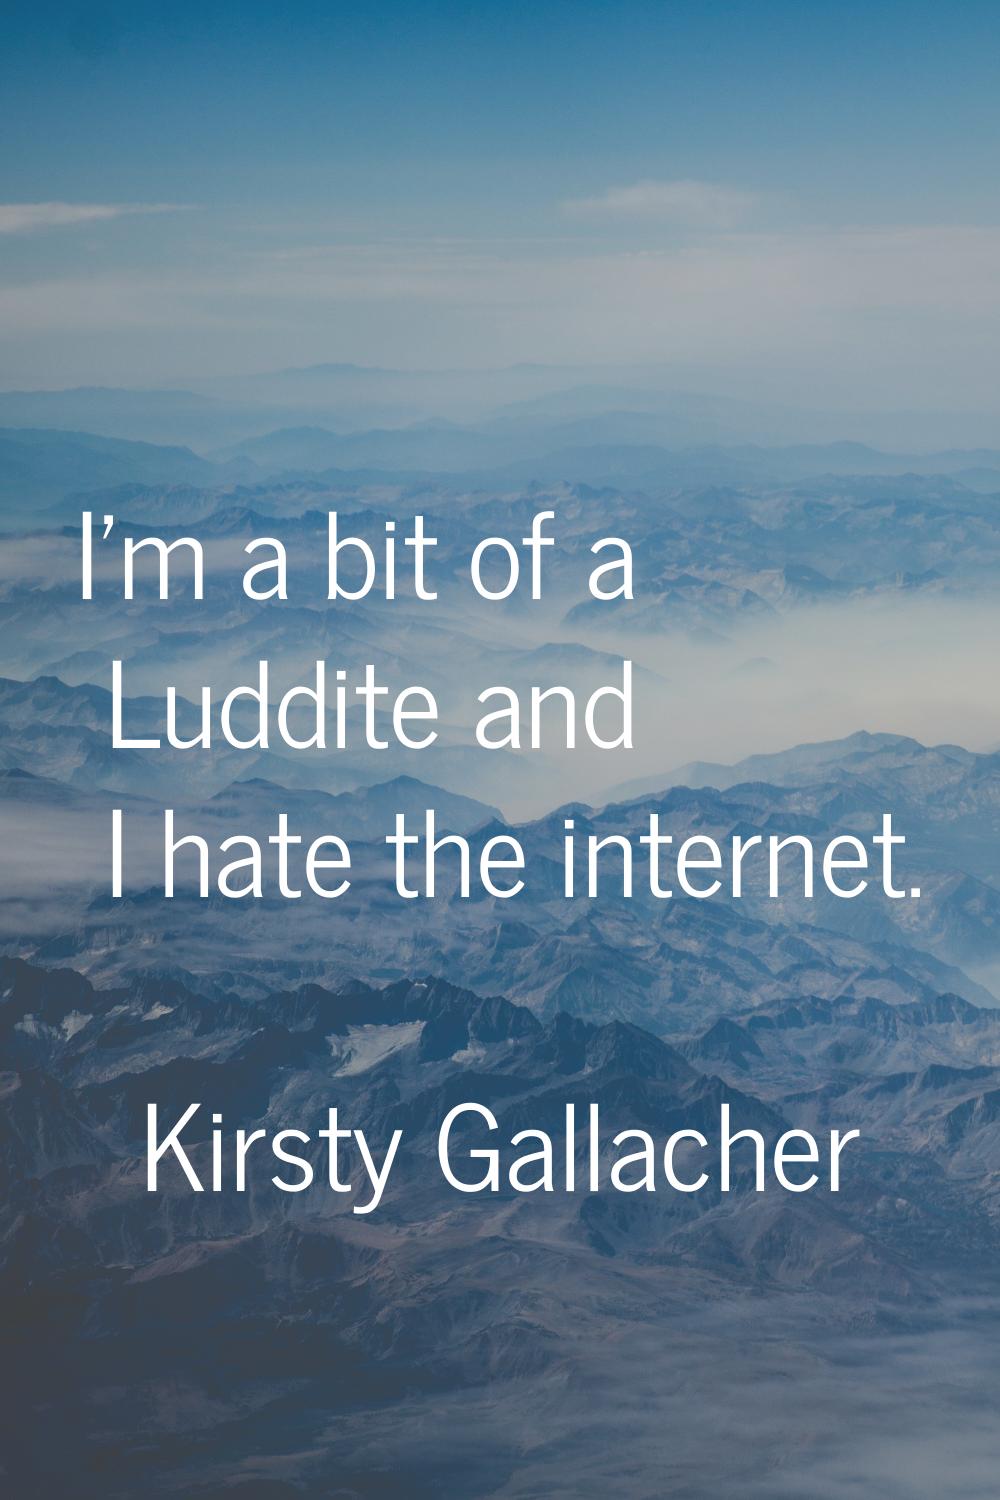 I'm a bit of a Luddite and I hate the internet.